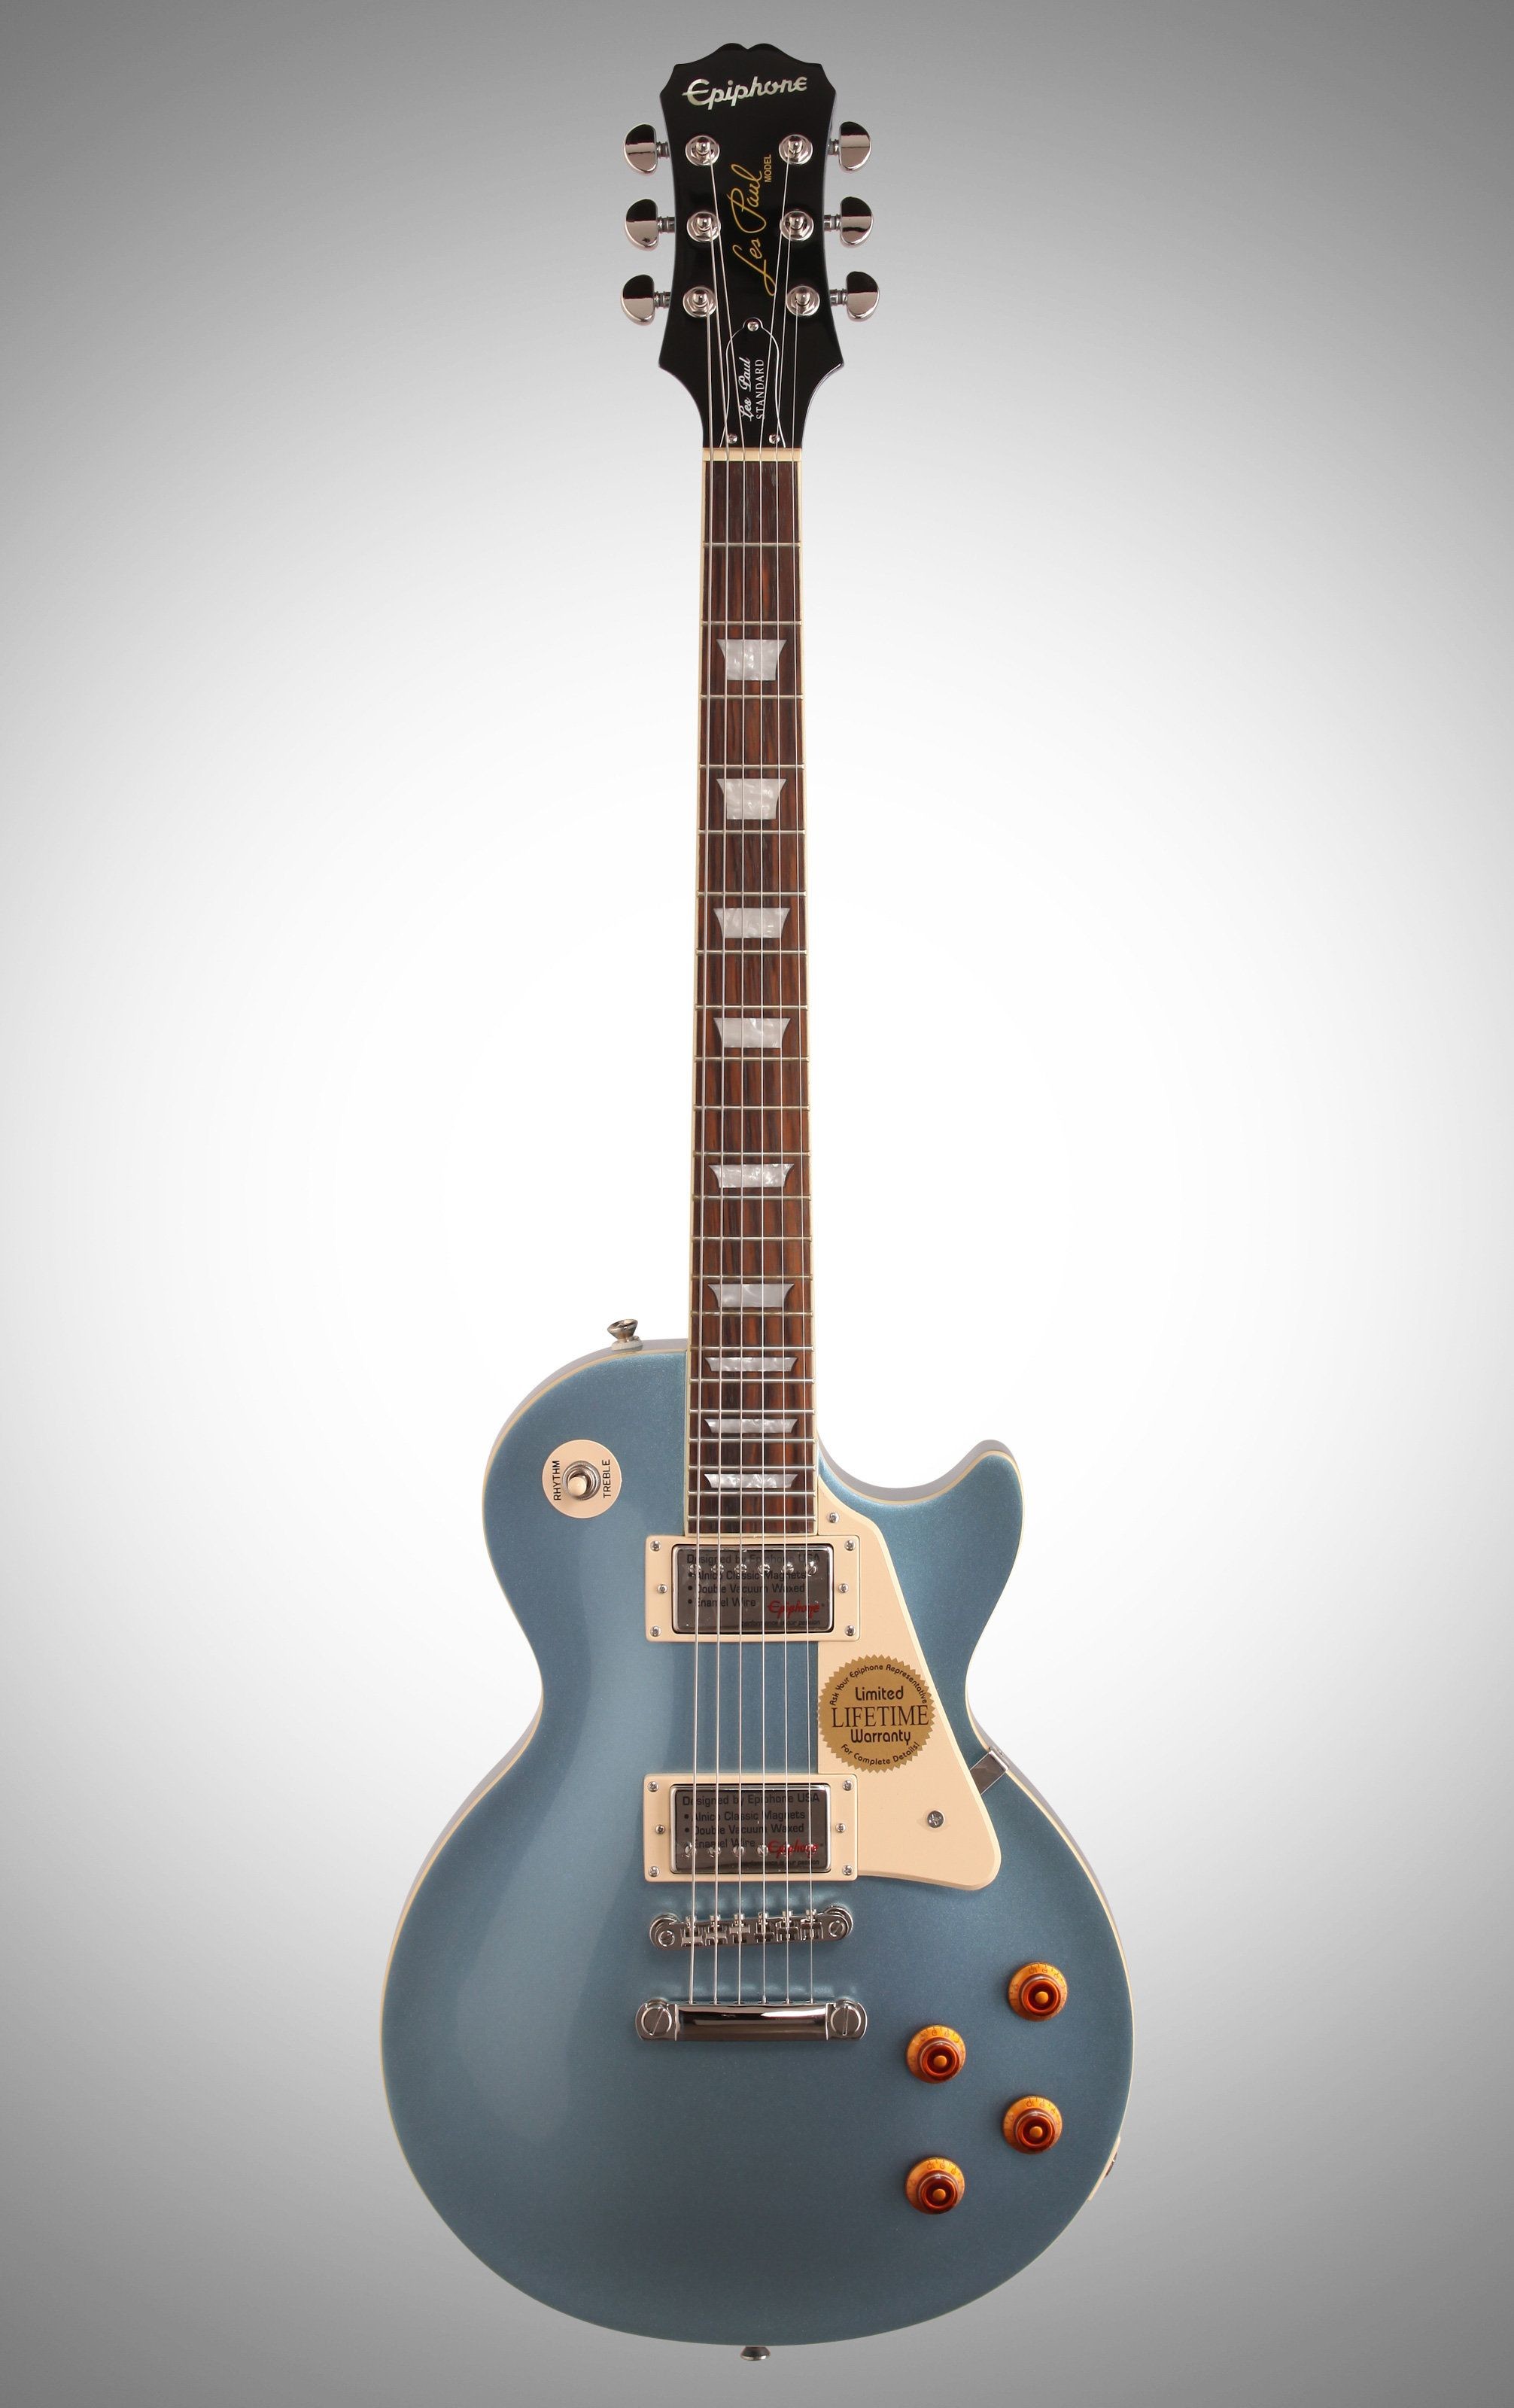 2012x3200 Epiphone Les Paul Standard in Pelham Blue. Awesome.